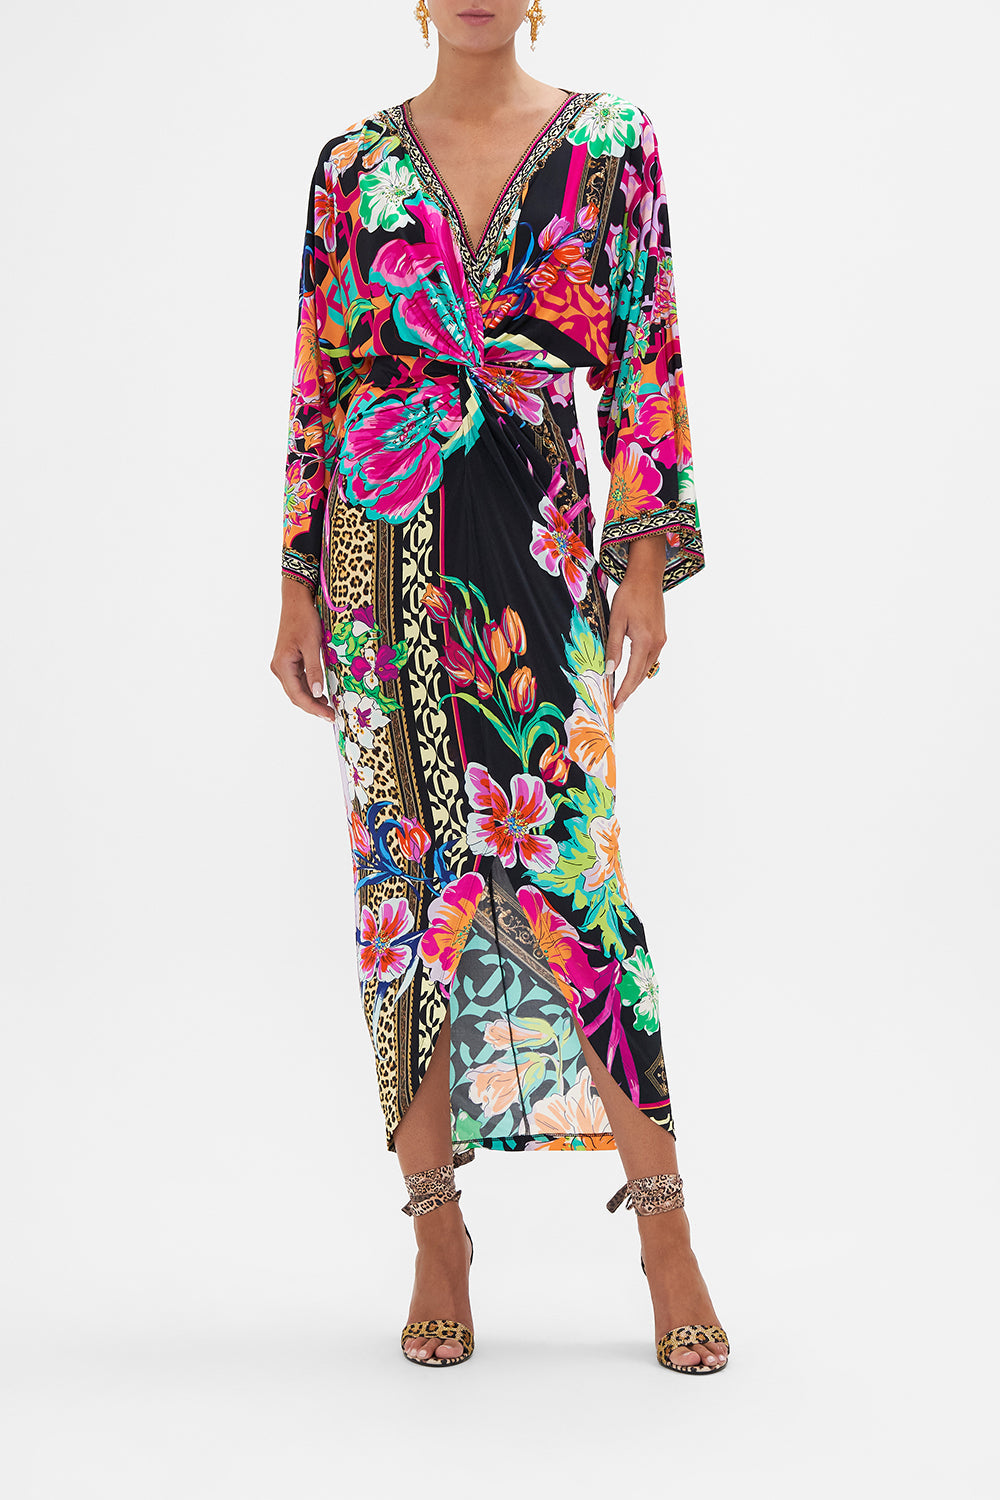 Front view of model wearing CAMILLA twist front dress in Printed Prima Vera 